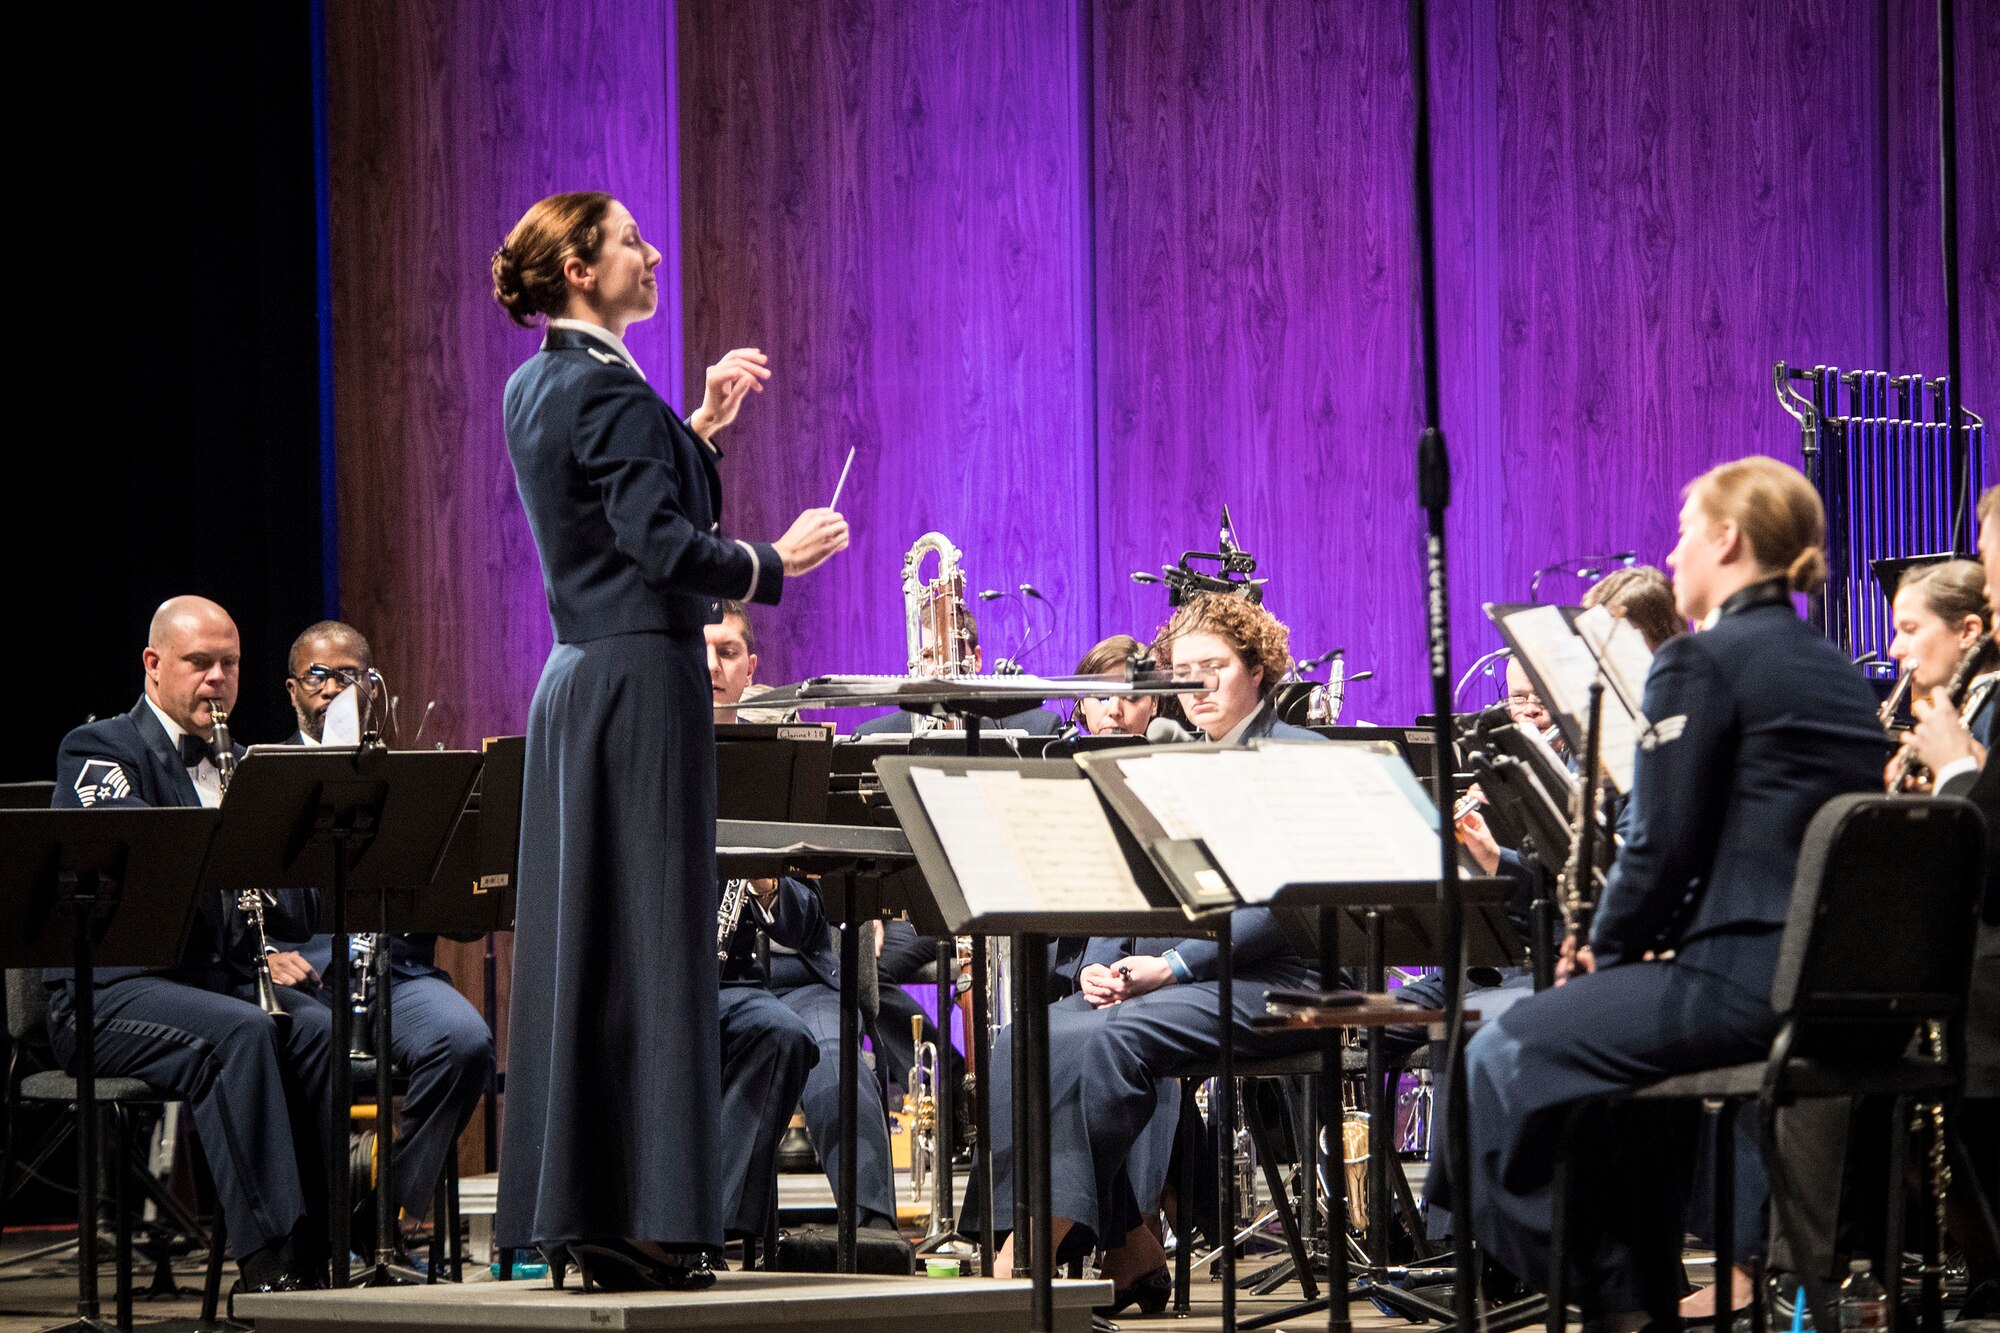 Capt. Shanti Simon conducts the U.S Air Force Academy Band during a performance Feb. 13 at Weber State University’s Austad Auditorium, Ogden, Utah. (U.S. Air Force photo)